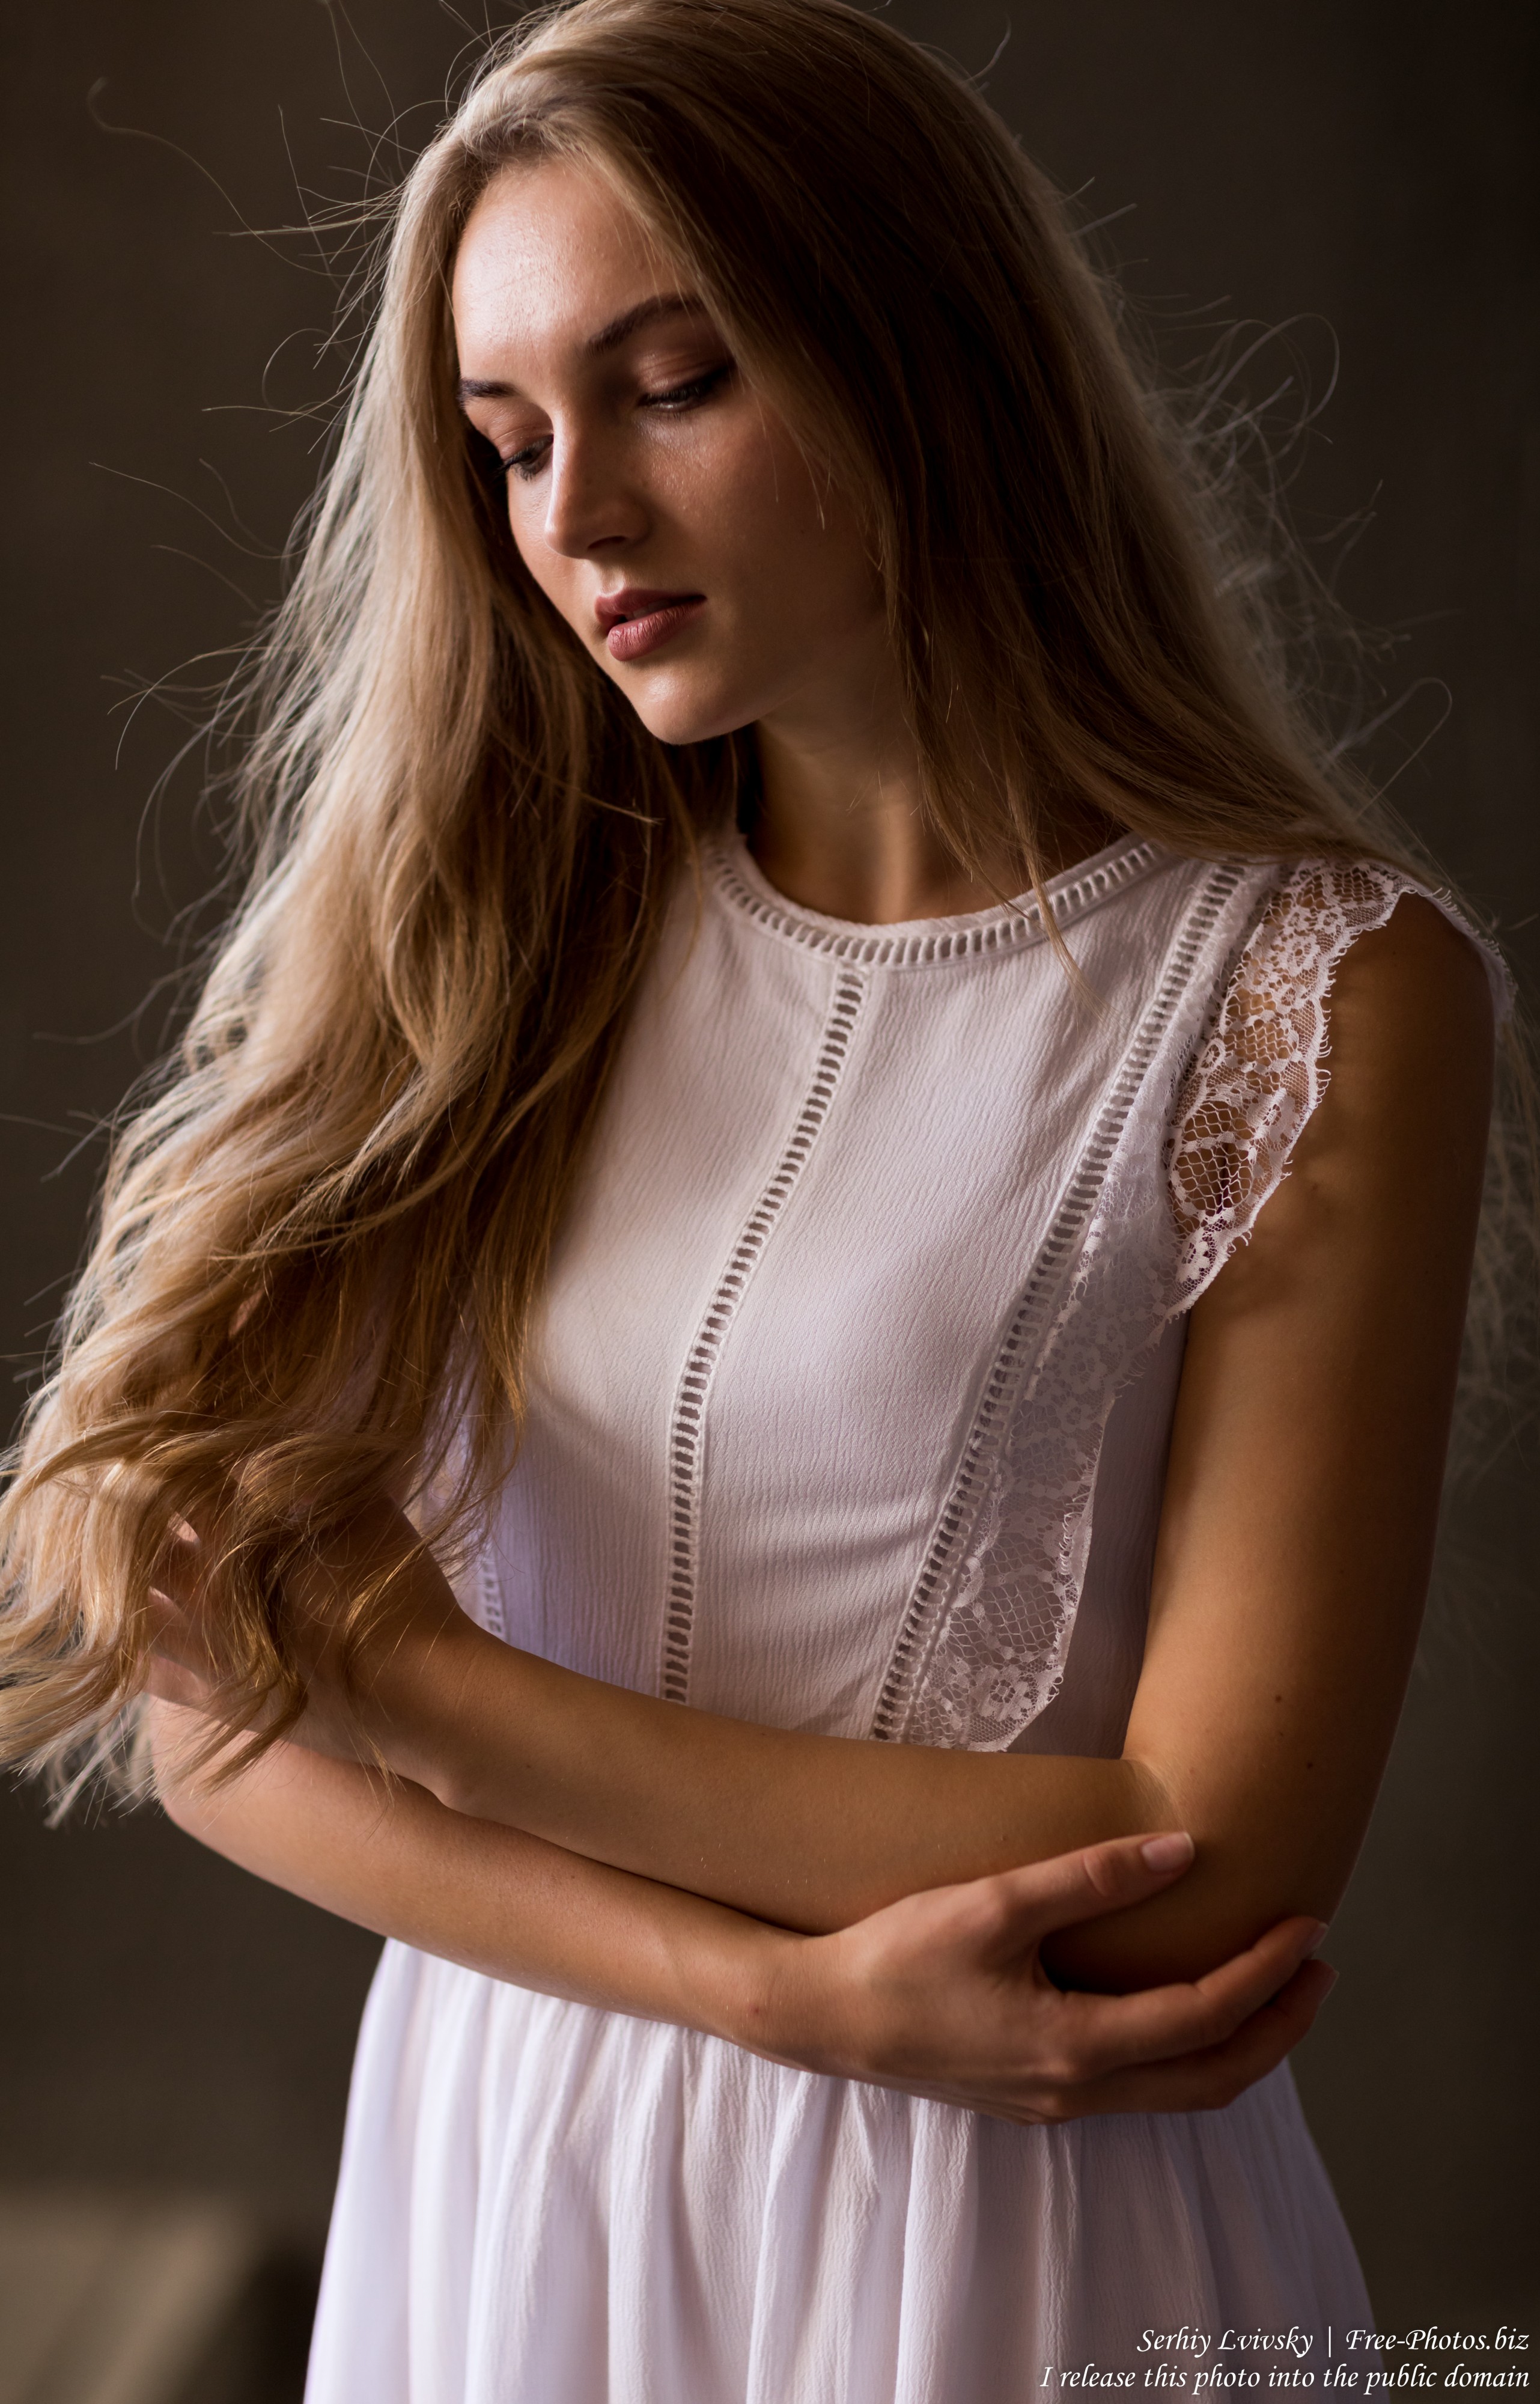 Yaryna - a 21-year-old natural blonde Catholic girl photographed in August 2019 by Serhiy Lvivsky, picture 20